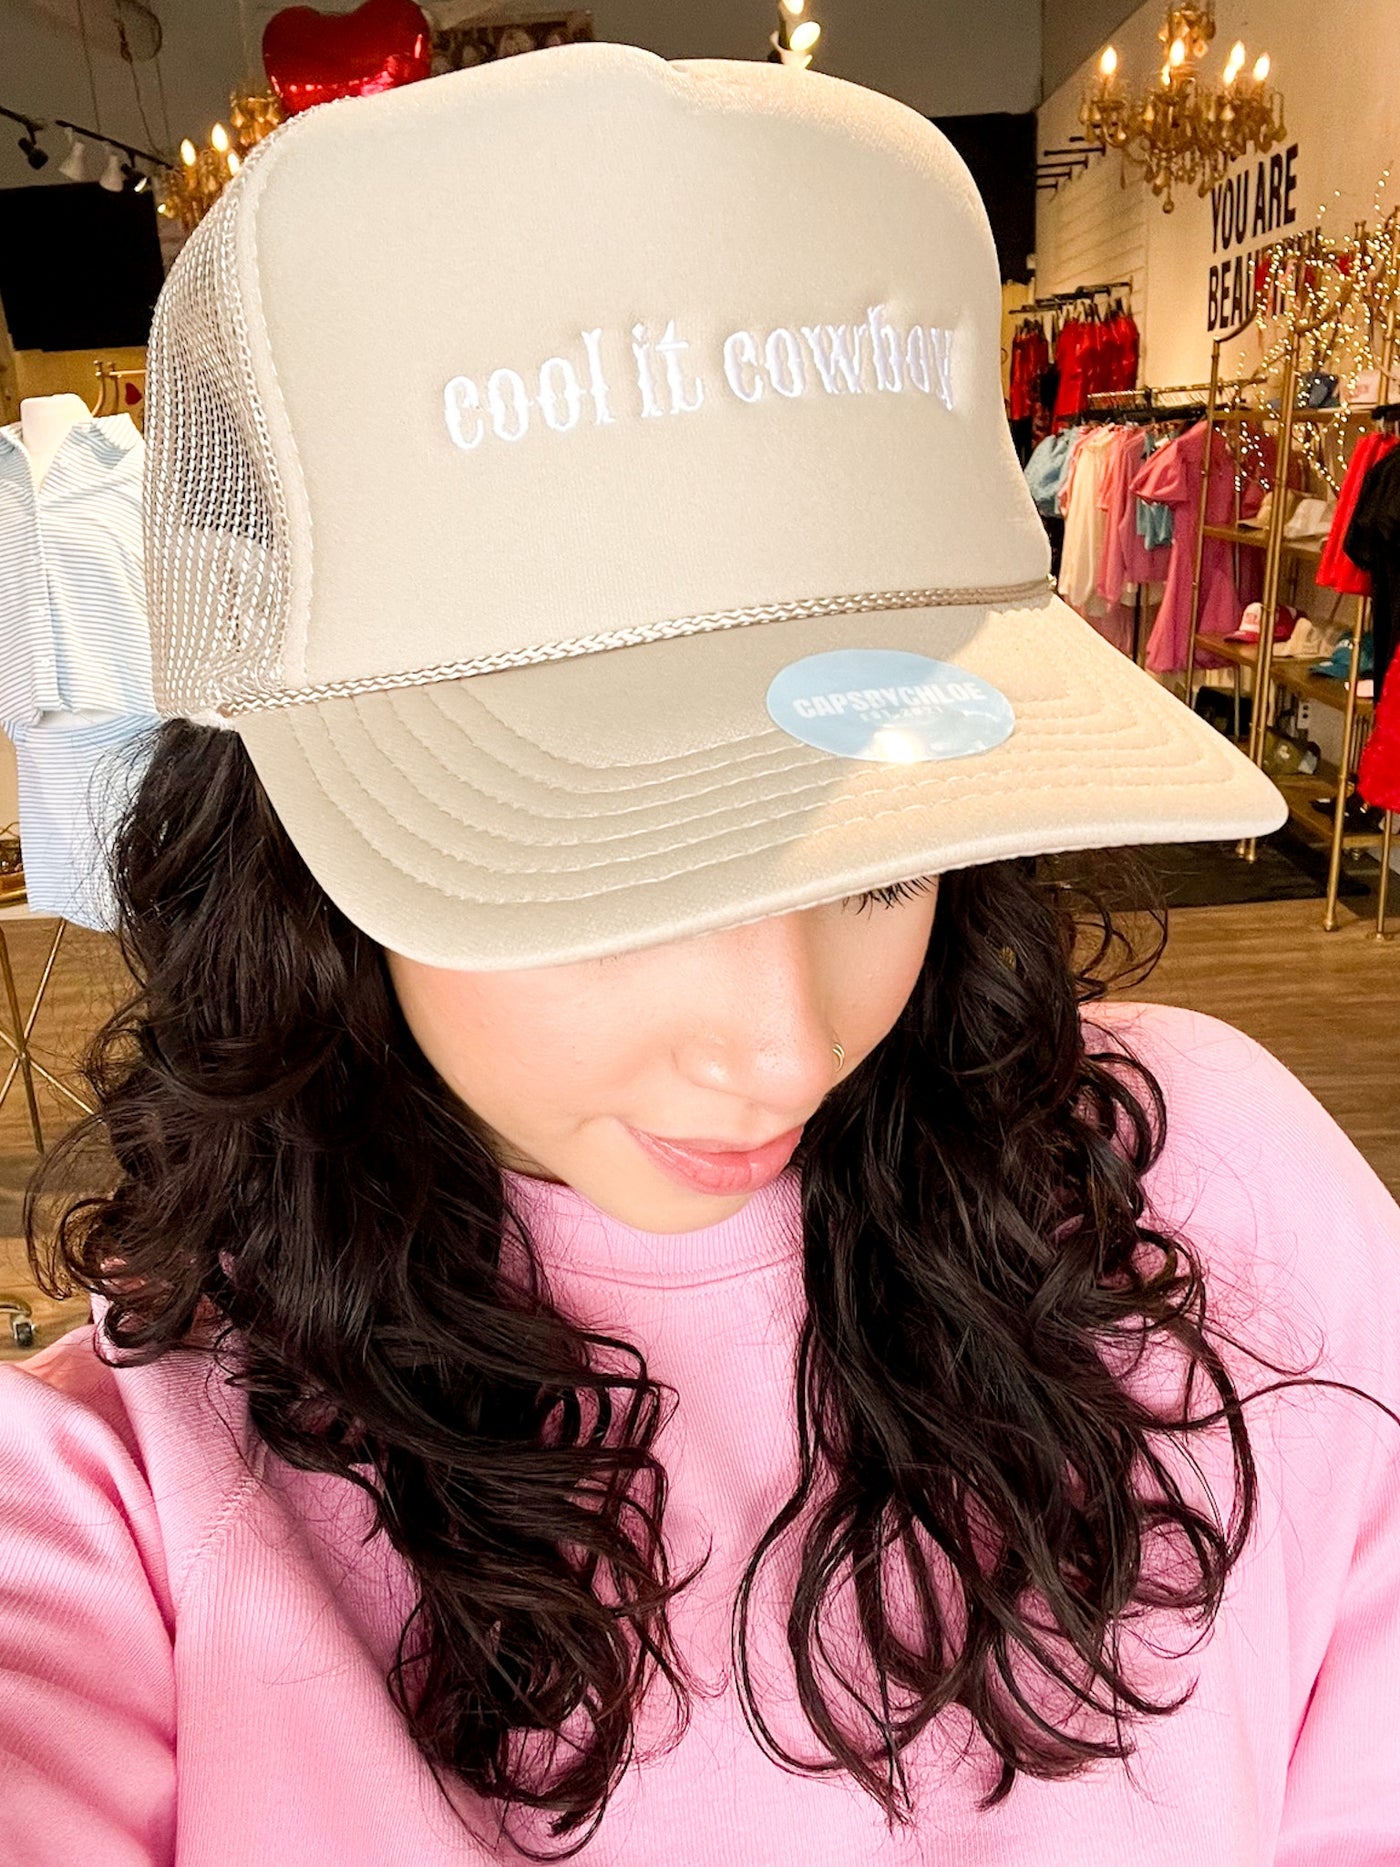 Cool It Cowboy Embroidered Cap